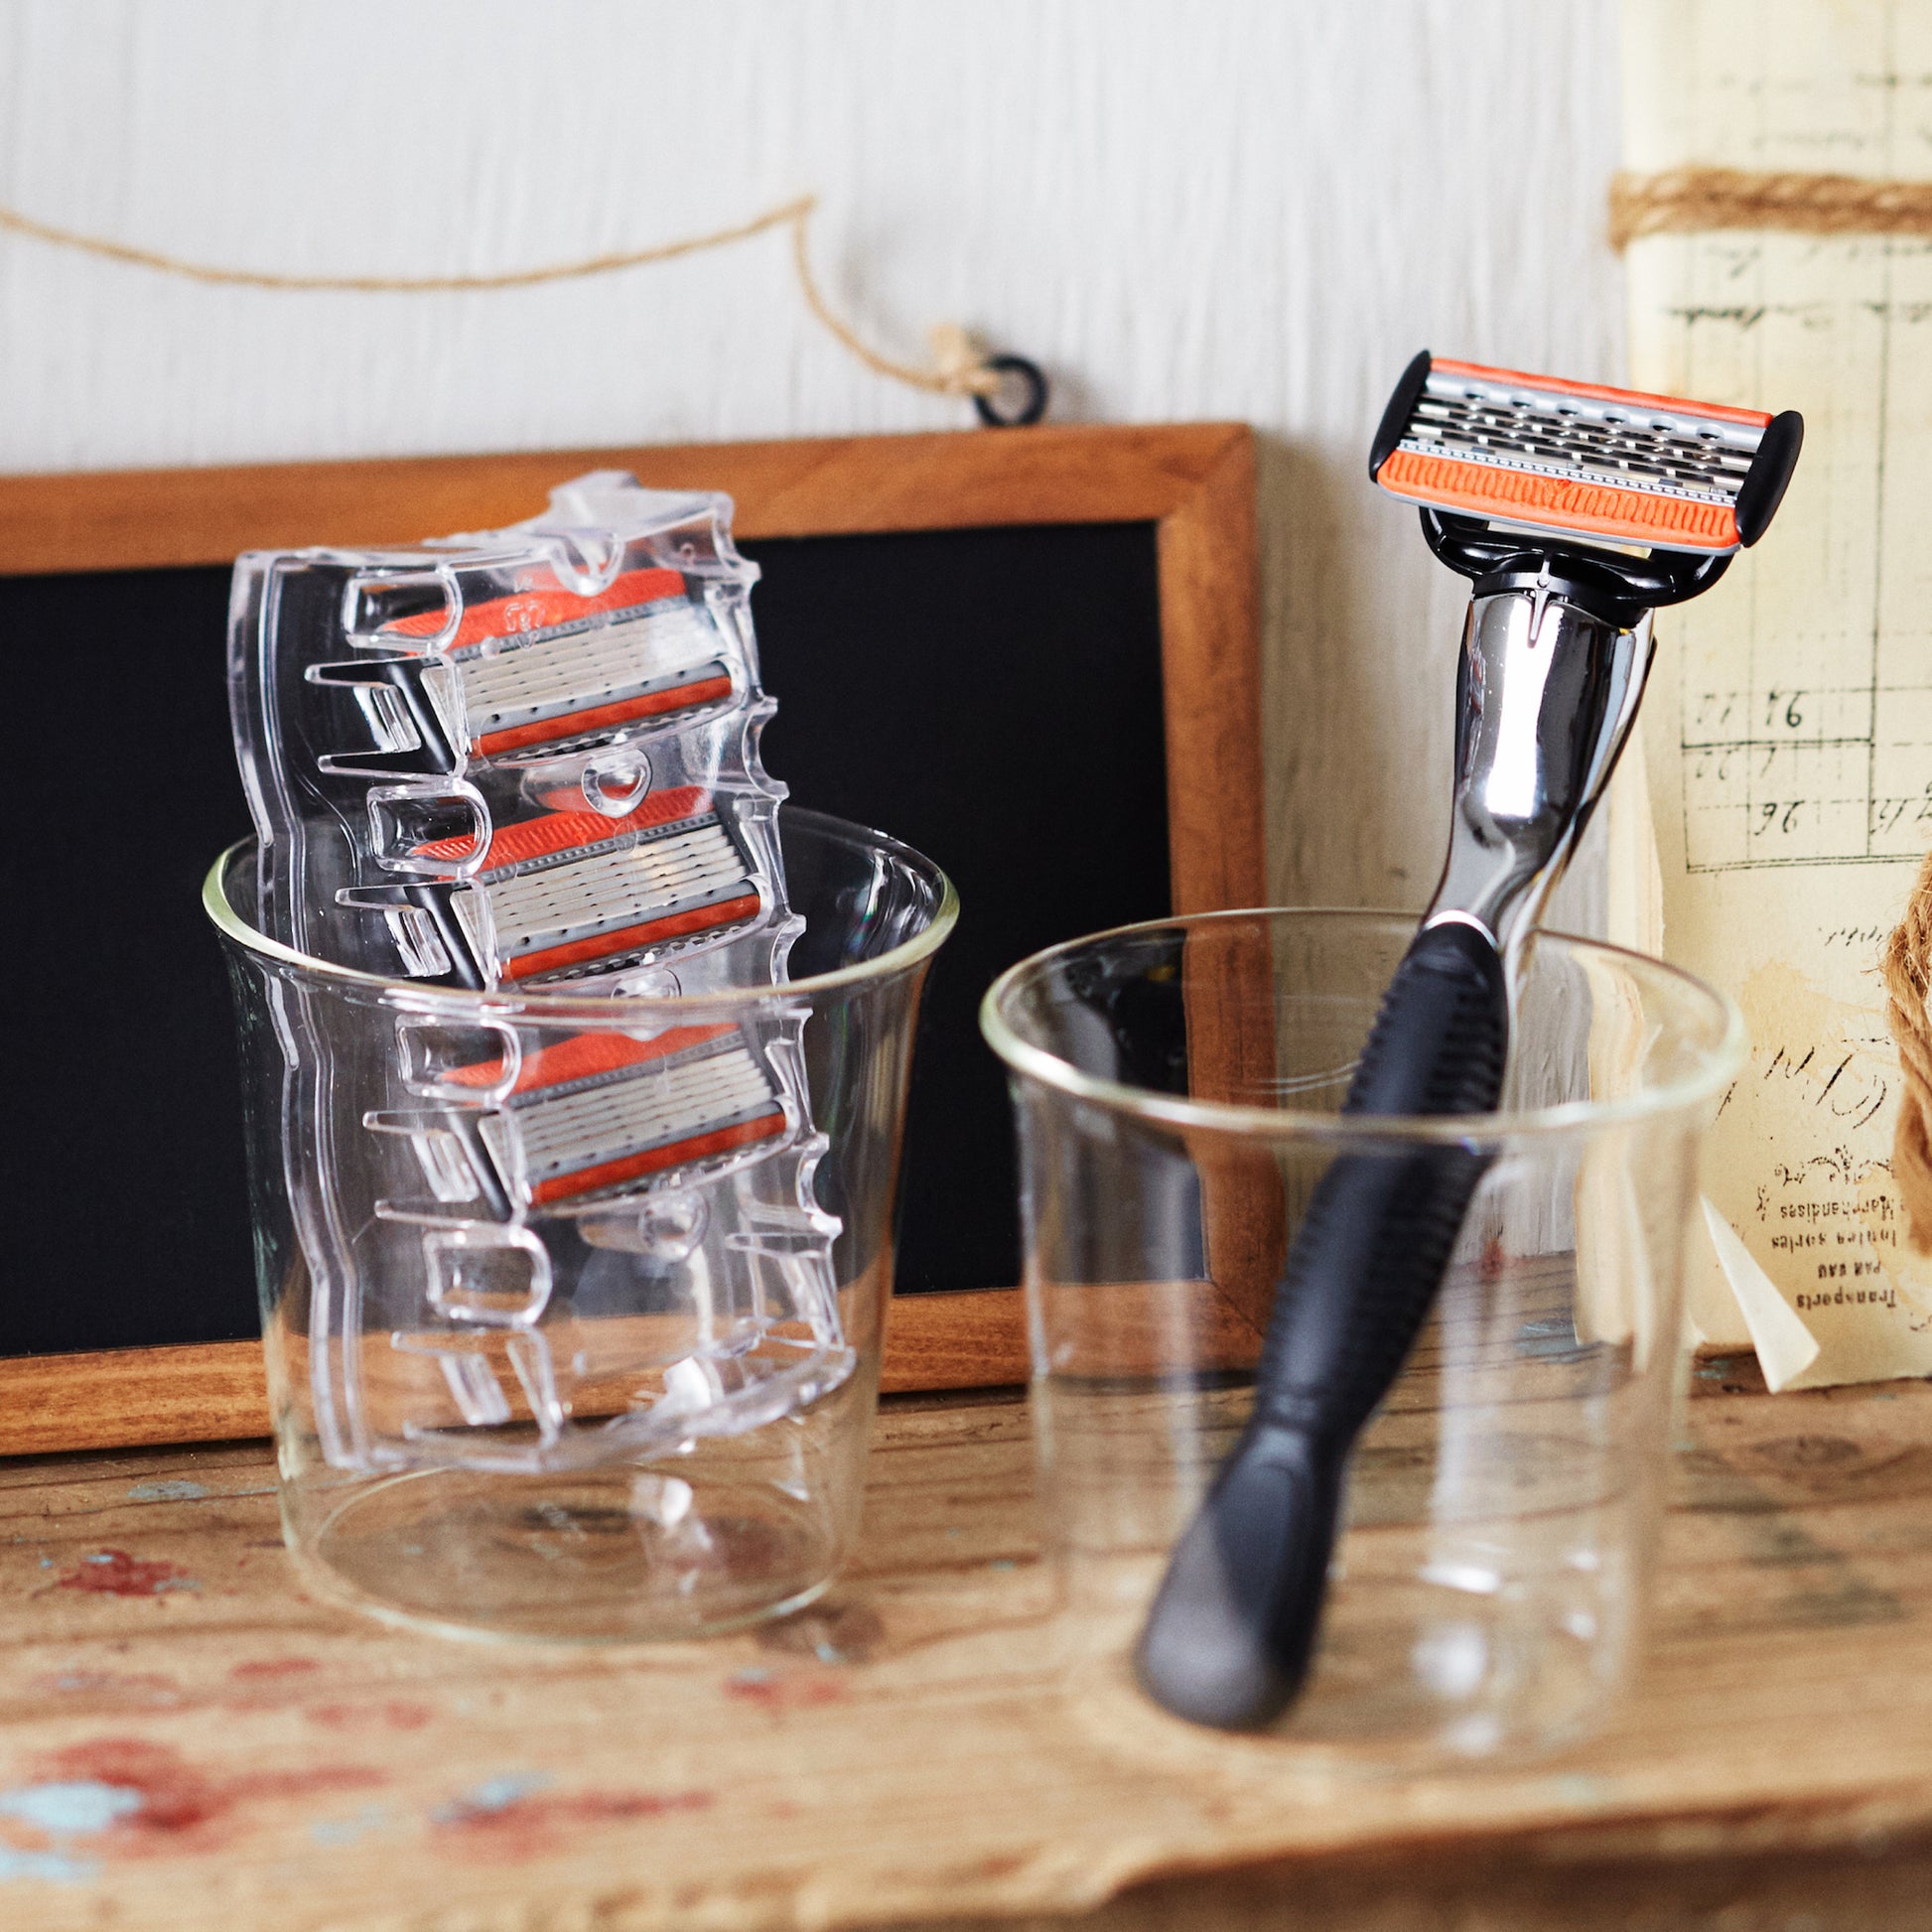 GALLEIDO orange and black razor in a glass cup with replaceable blades in another cup